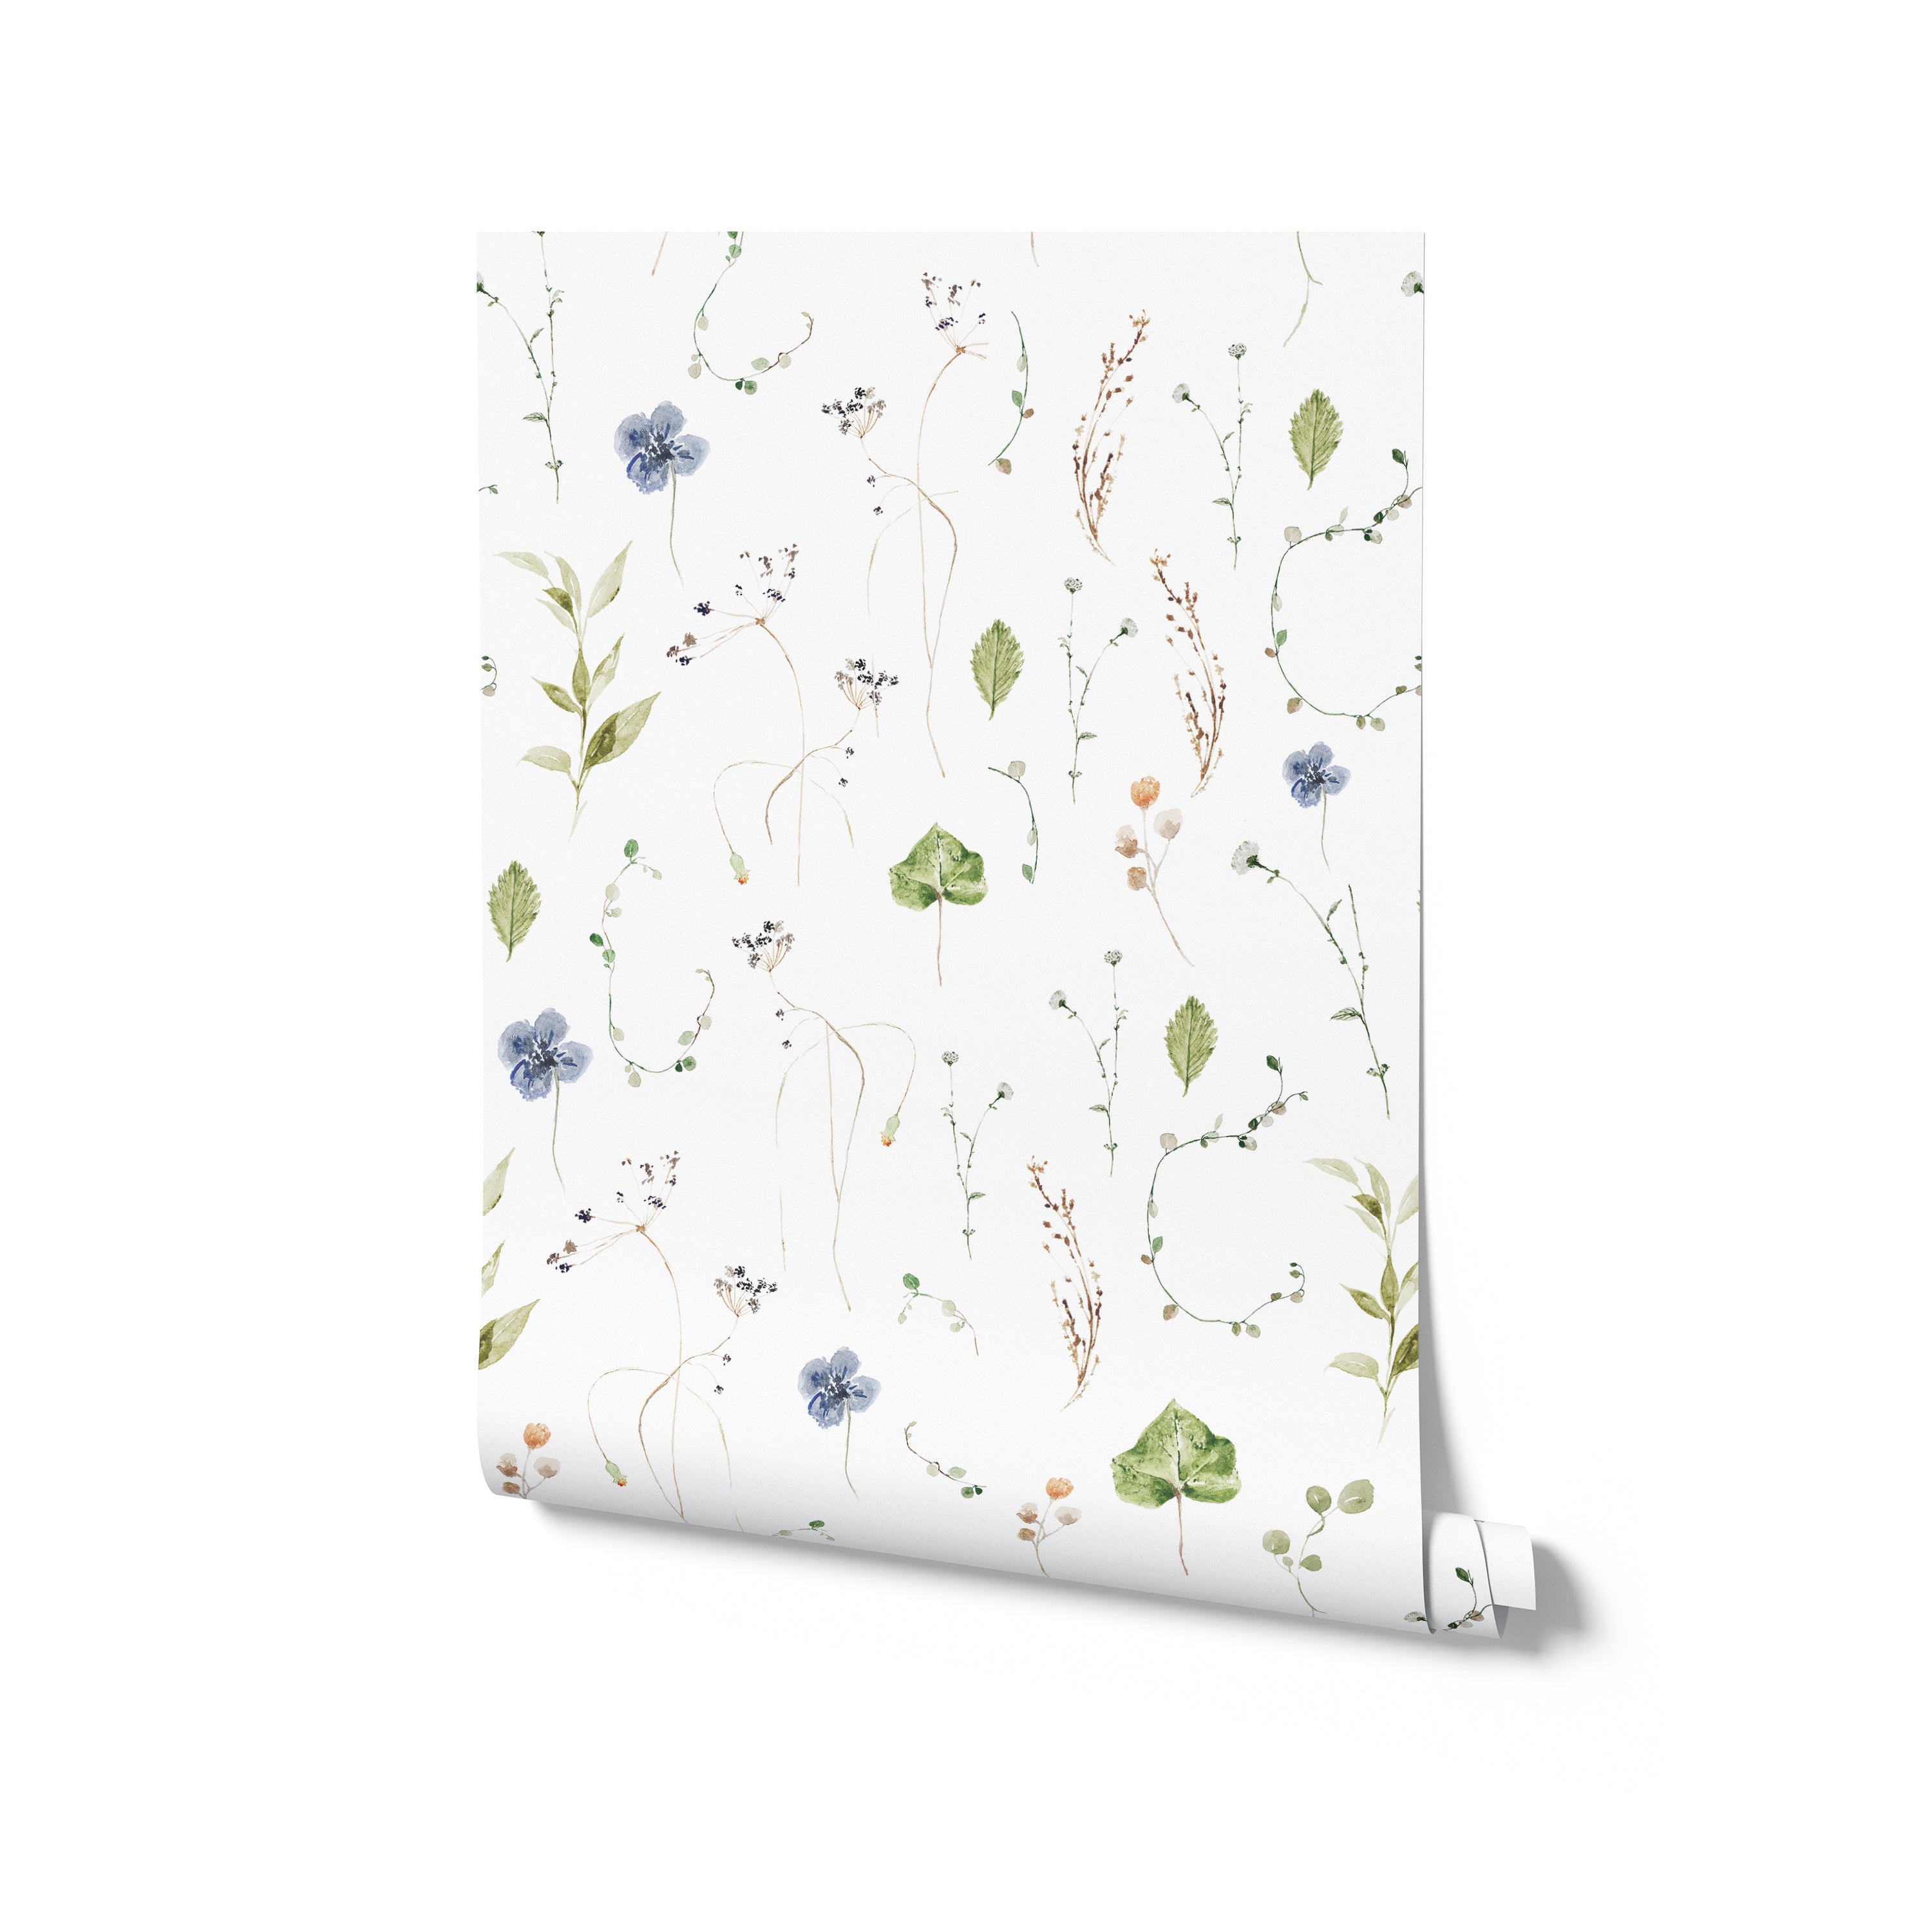 A roll of 'Ikebana Floral Wallpaper' illustrating its intricate botanical design with blue blossoms and green foliage that exudes a tranquil, organic beauty against a white backdrop.